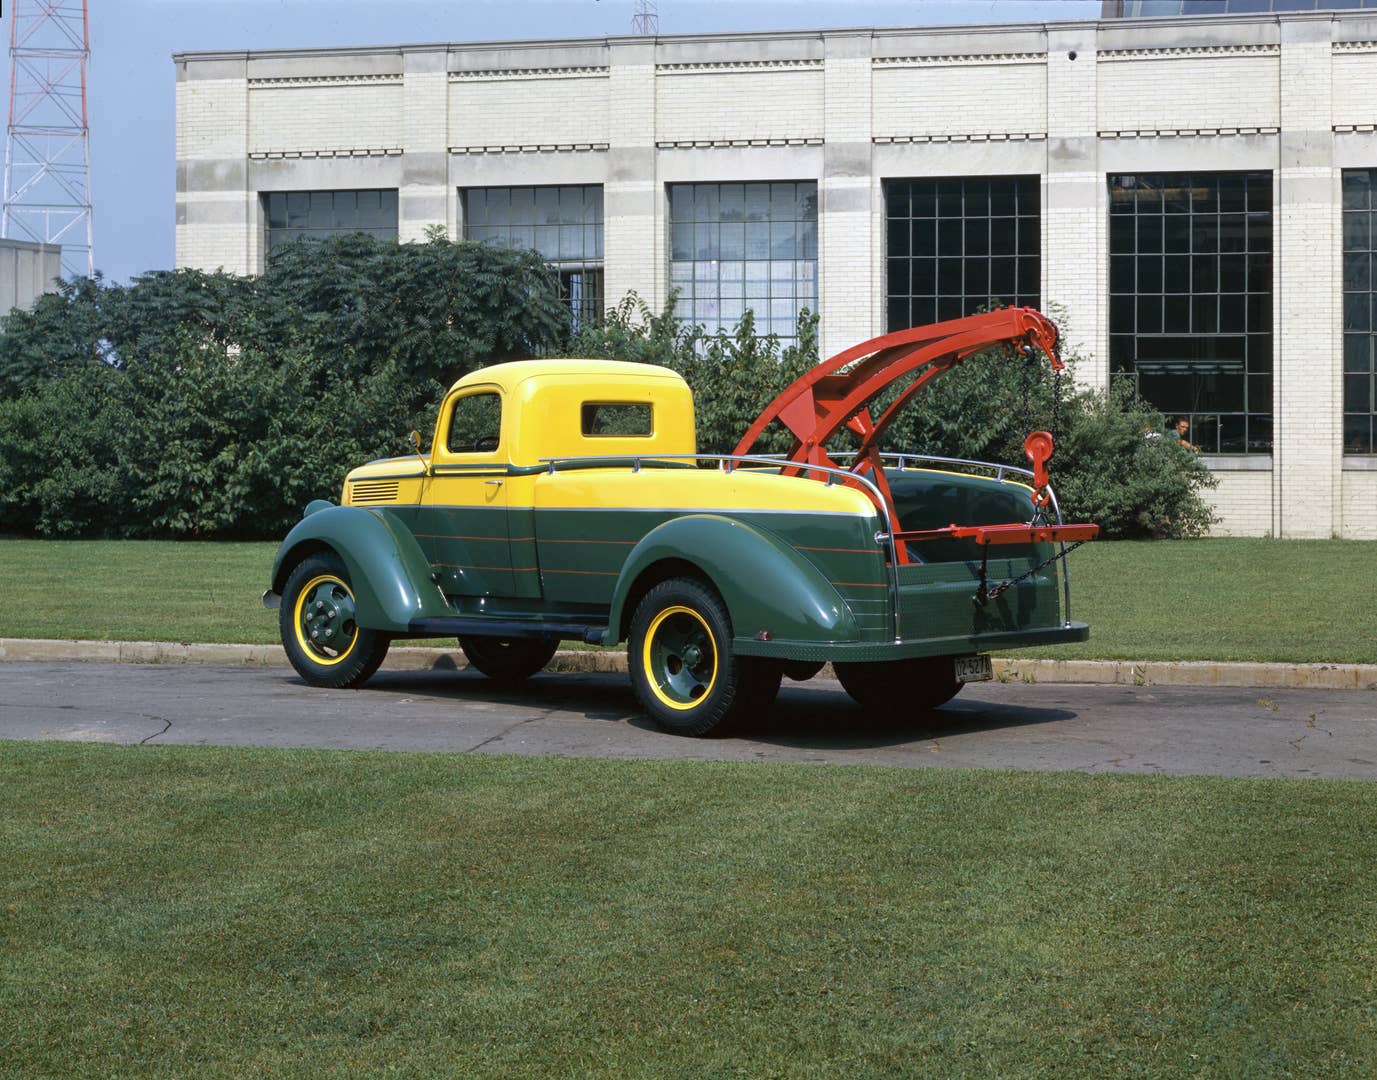 Imagine if you need a picture of a Ford tow truck from the 1940s. Yesterday, that would have been really hard work. Now it's easy!